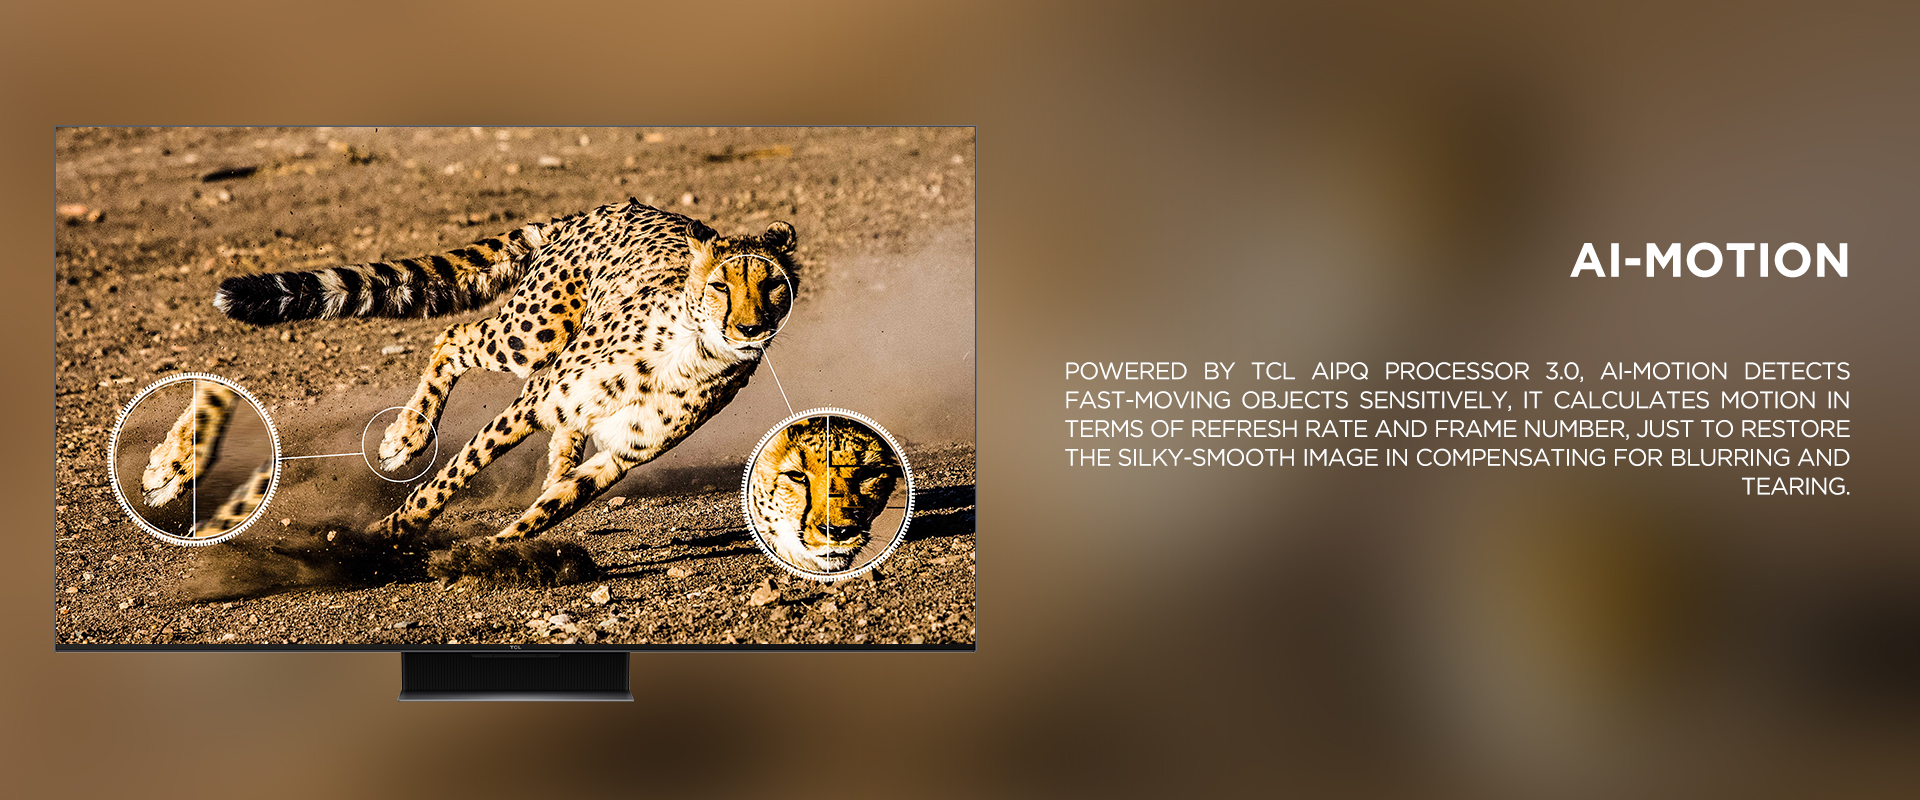 Ai-MOTION - Powered by TCL AiPQ Processor 3.0, Ai-Motion detects fast-moving objects sensitively, it calculates motion in terms of refresh rate and frame number, just to restore the silky-smooth image in compensating for blurring and tearing.